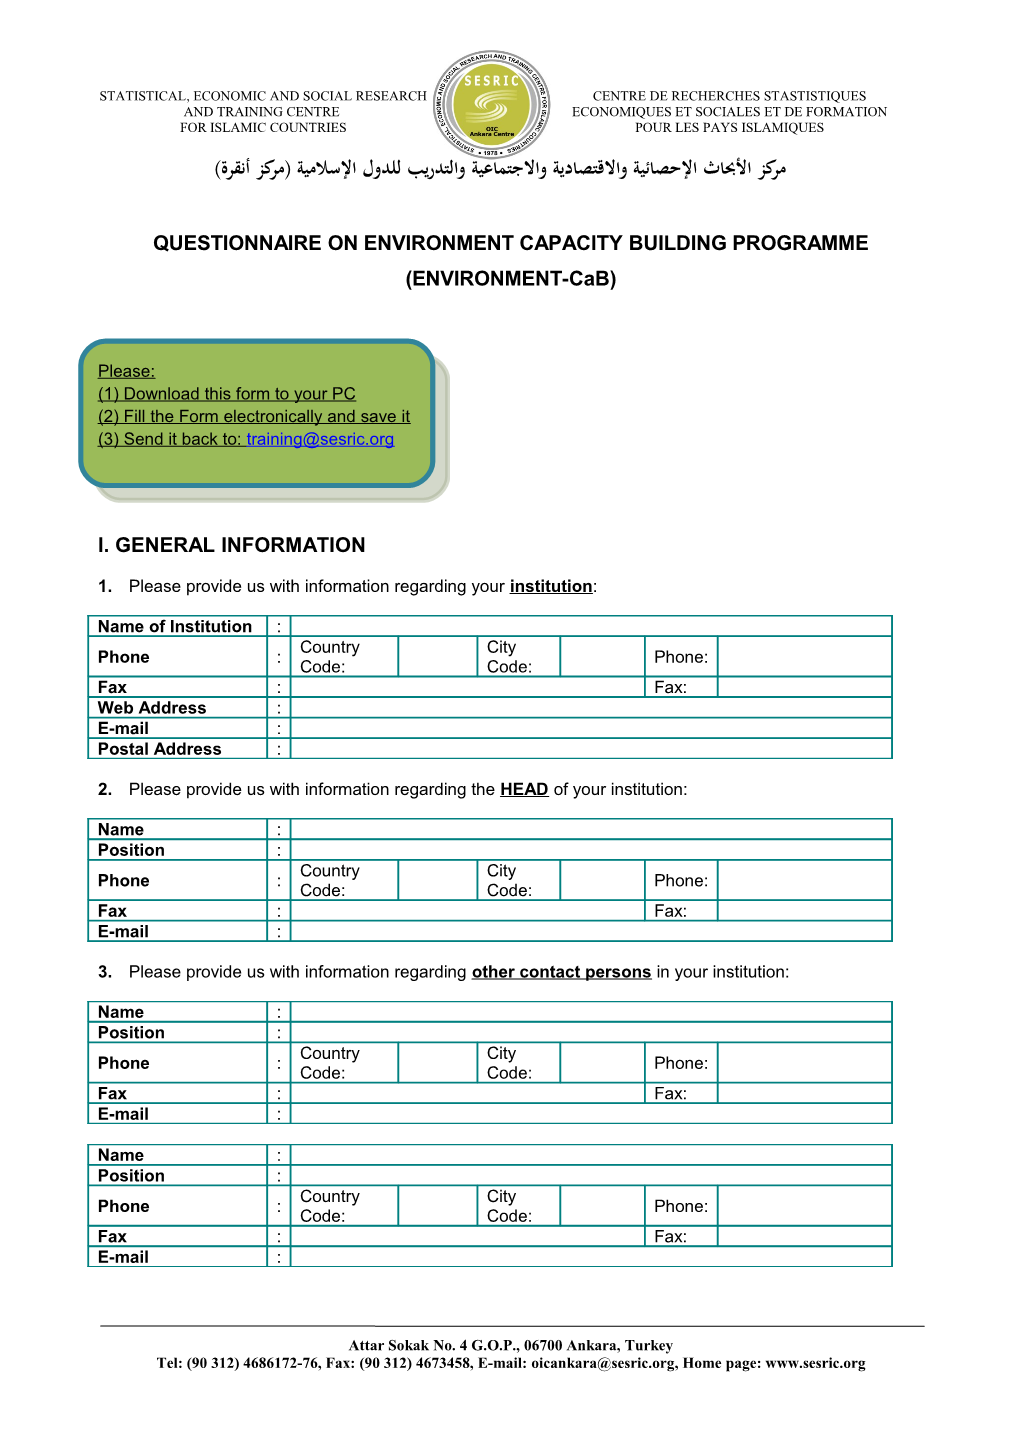 QUESTIONNAIRE on ENVIRONMENT CAPACITY BUILDING PROGRAMME (ENVIRONMENT-Cab)